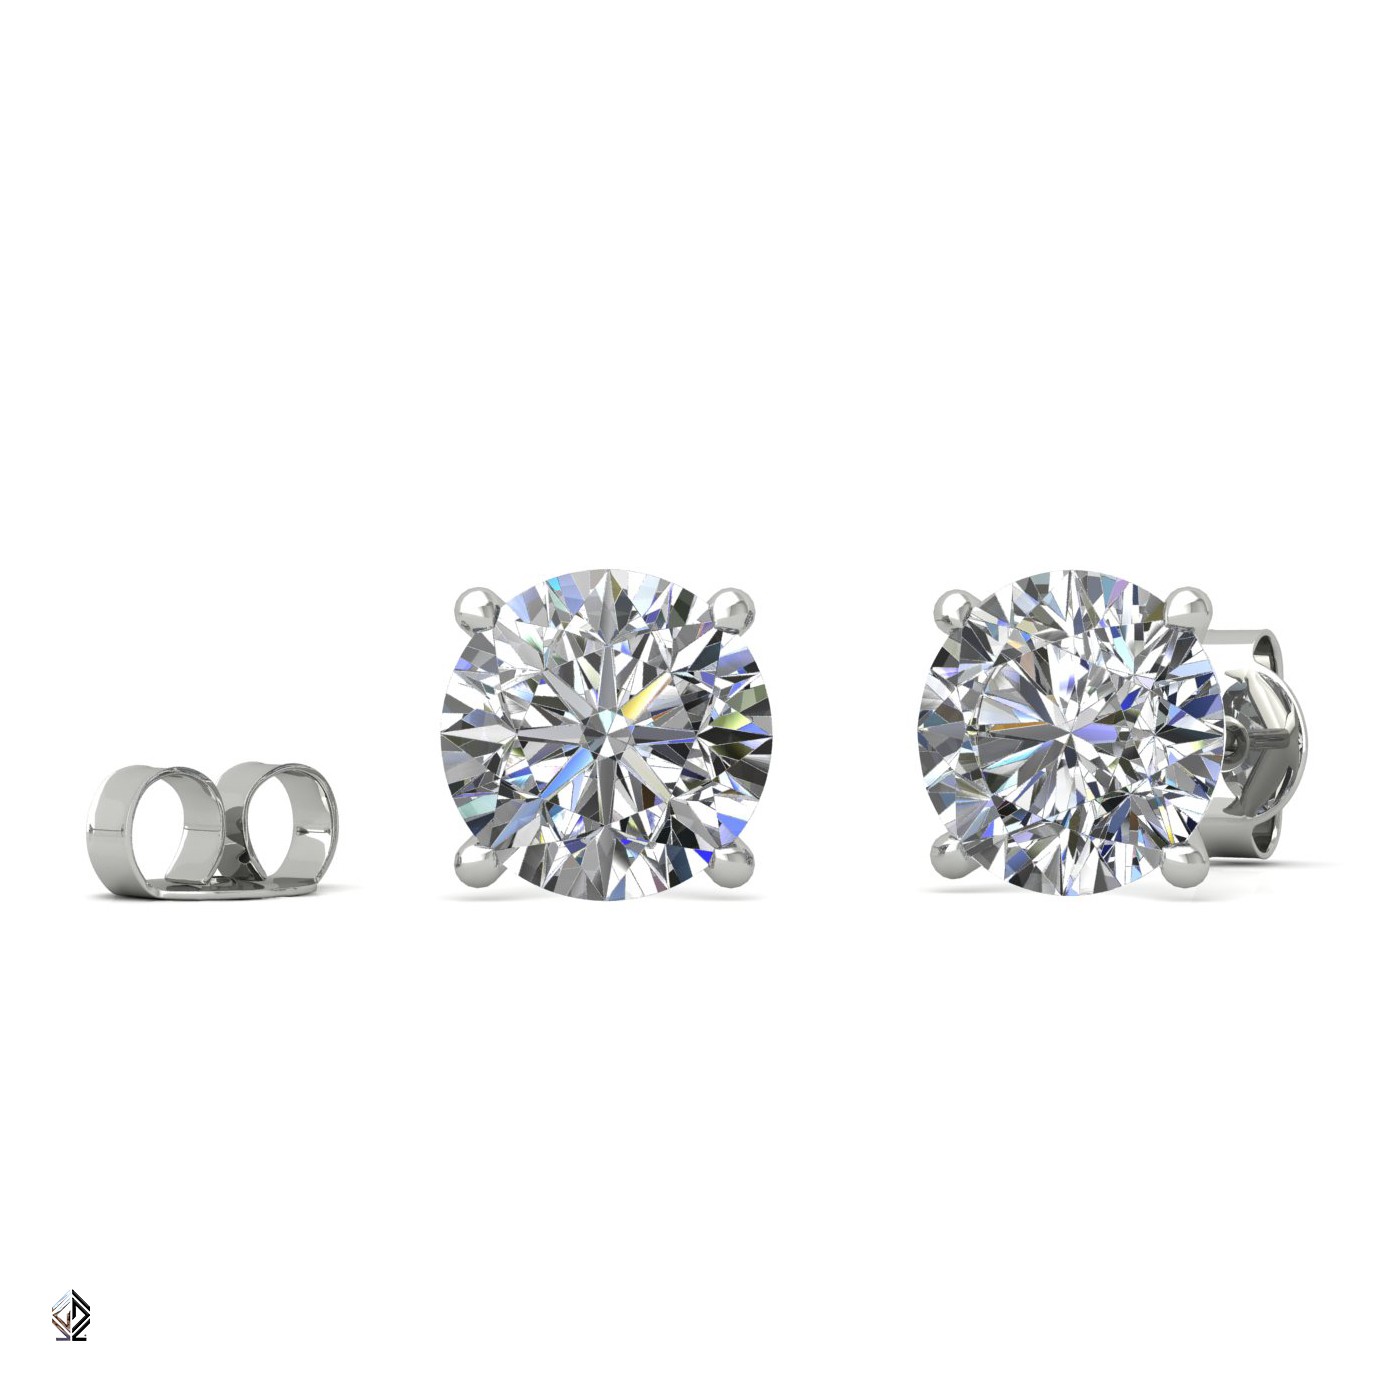 18k white gold 1.5 ct each (3,0 tcw) 4 prongs round cut classic diamond earring studs Photos & images